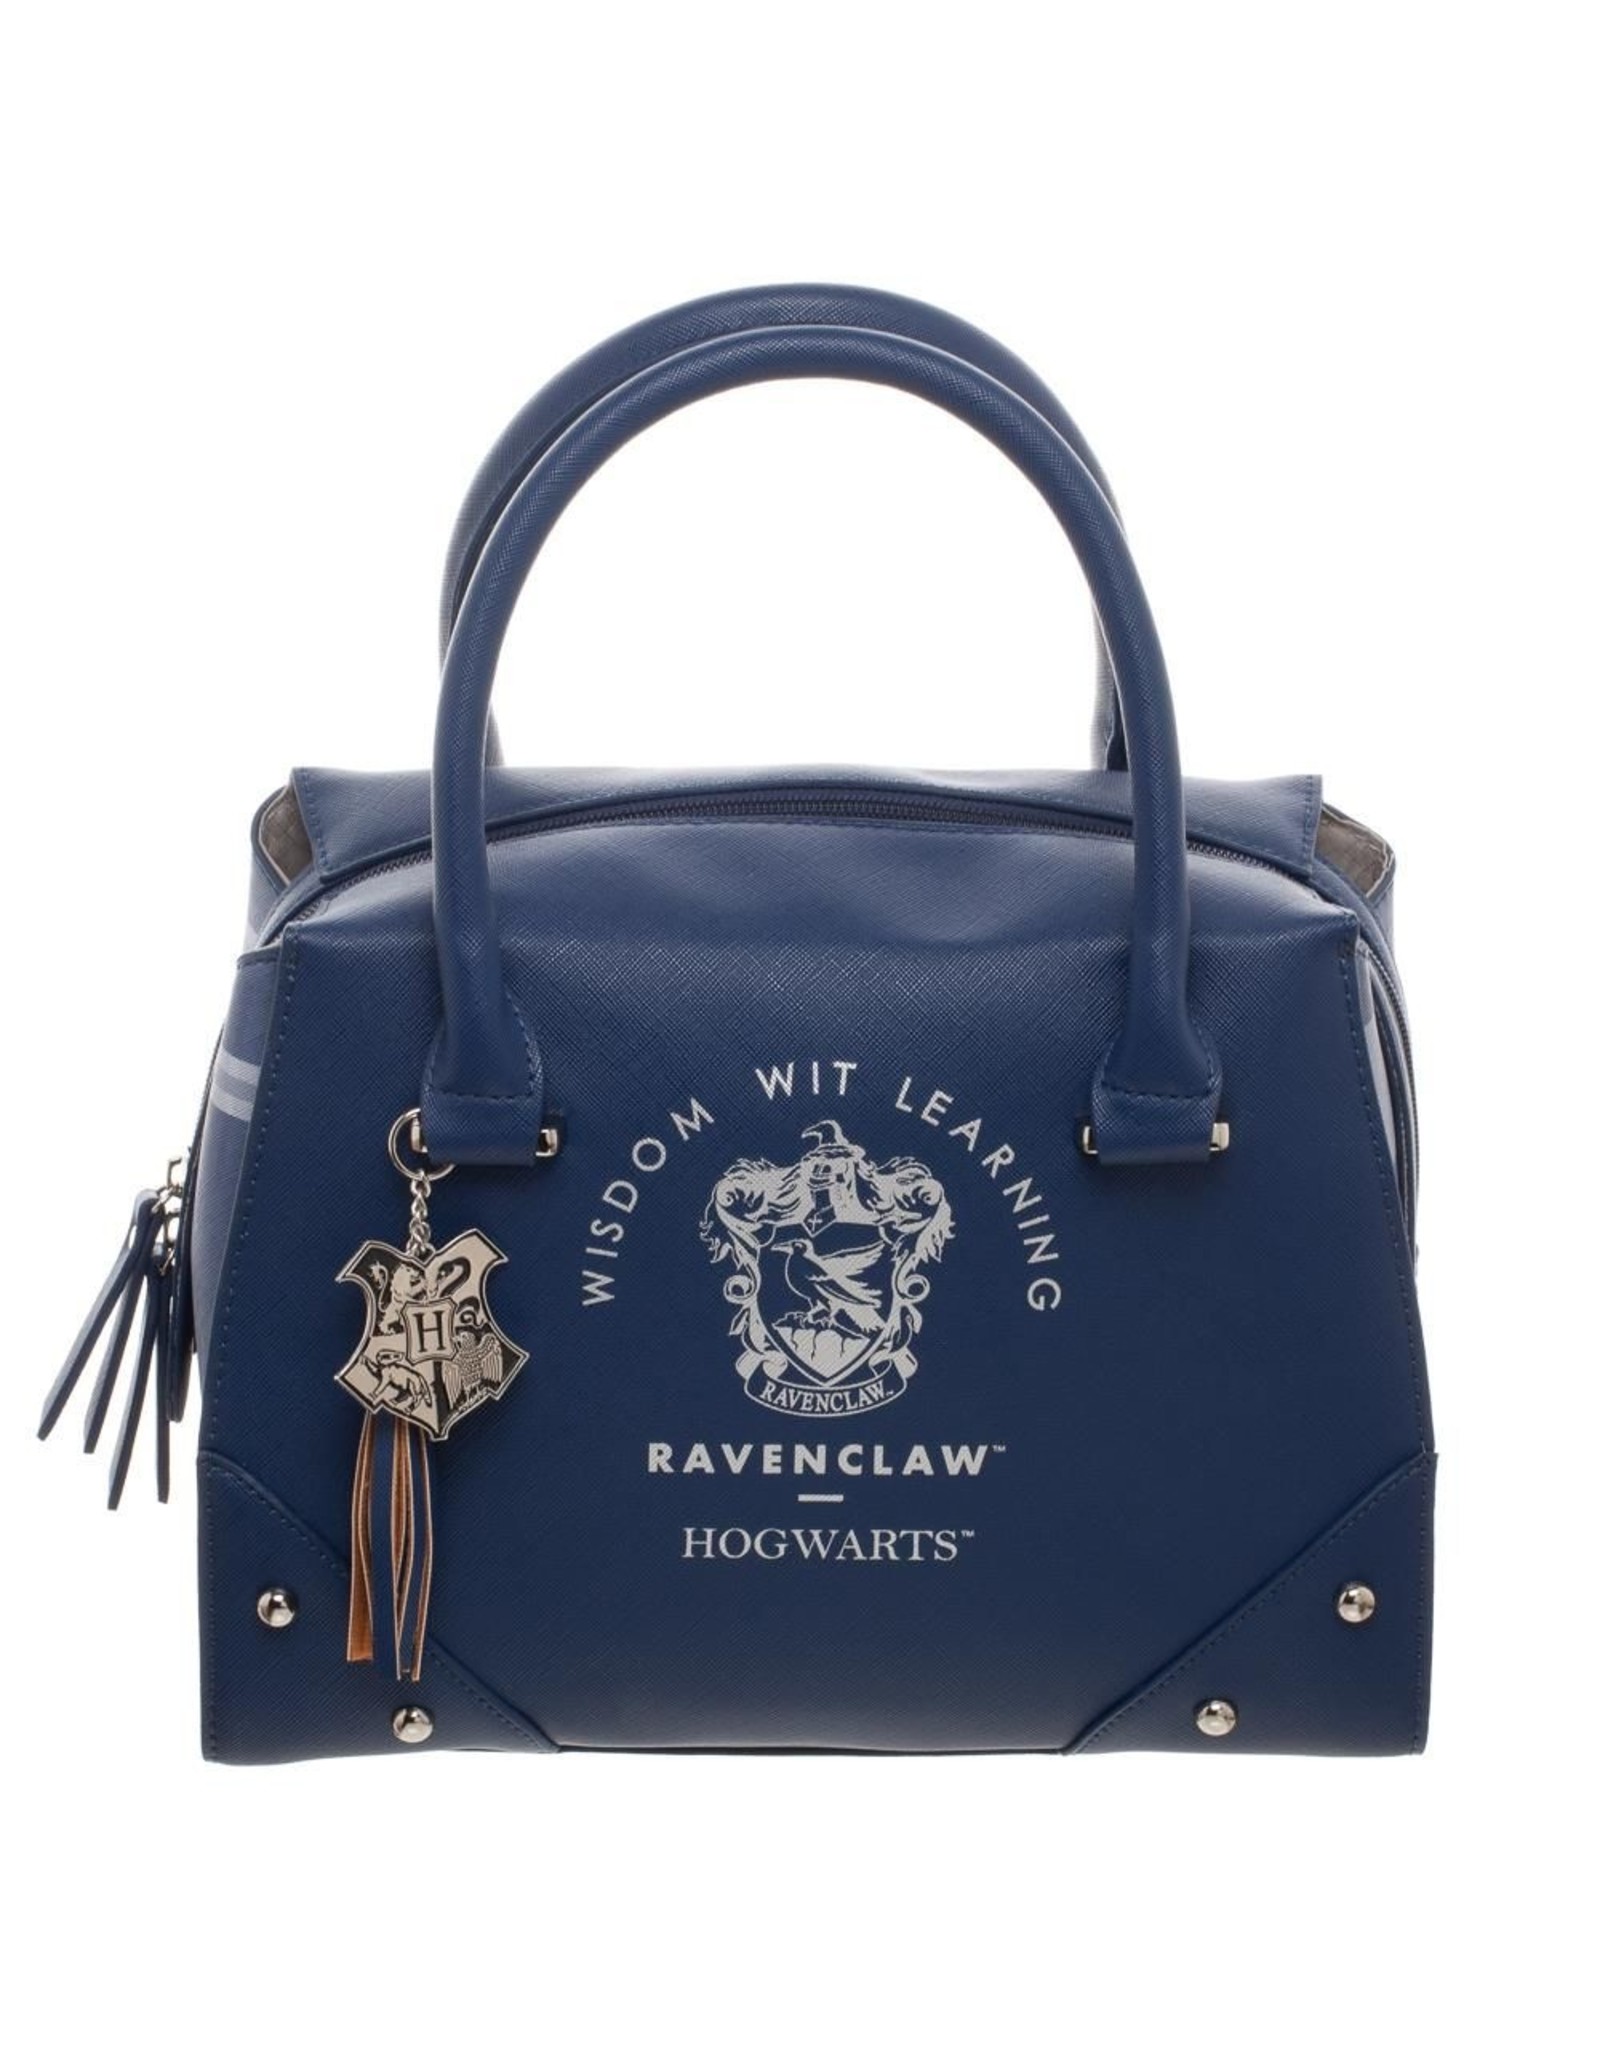 Harry Potter Merchandise - Harry Potter Ravenclaw Luxury Handbag with Plaid Sides y